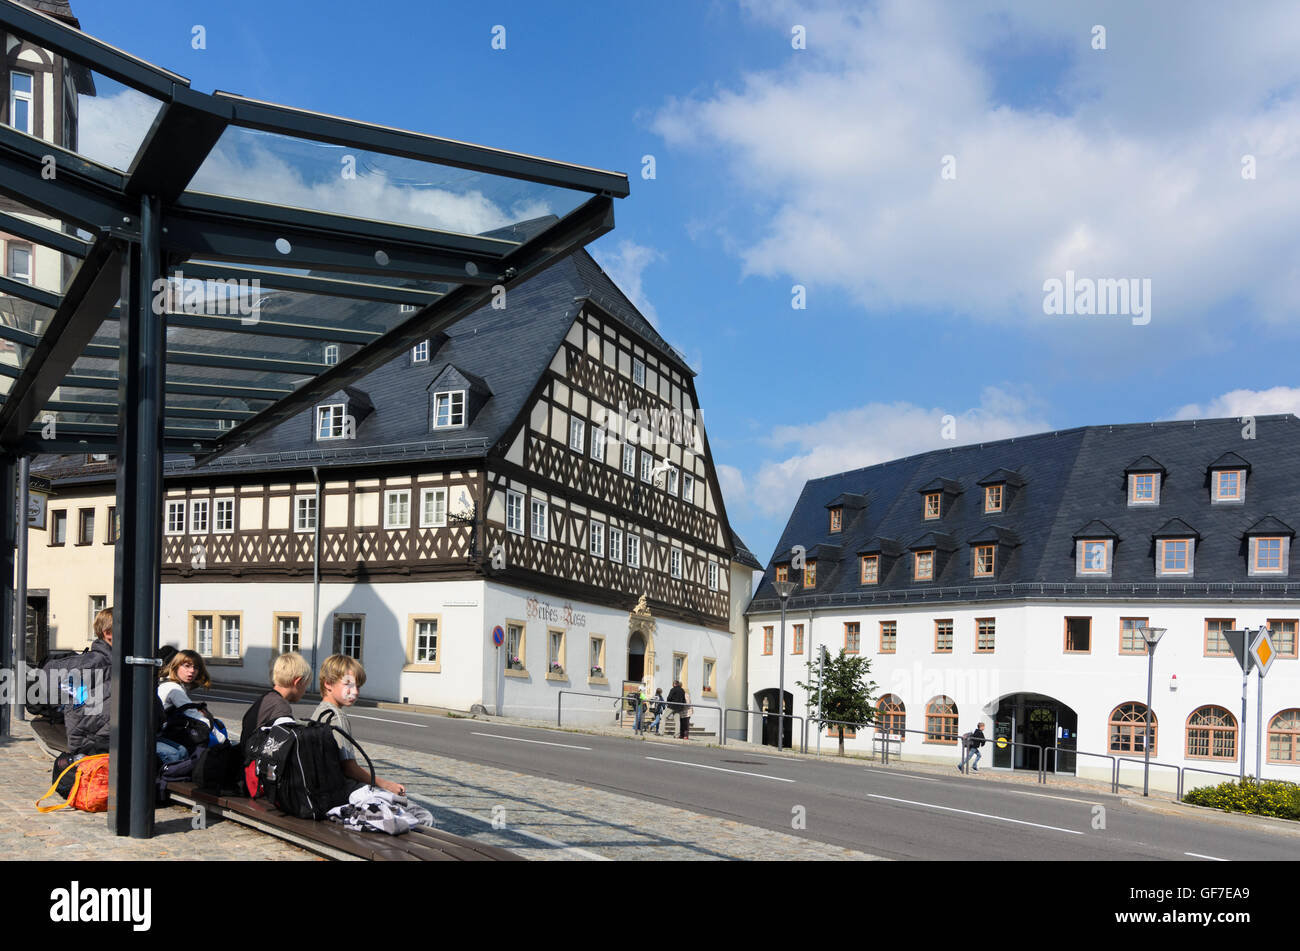 Hartenstein: Marketplace with half-timbered house ' White Horse ', Germany, Sachsen, Saxony, Stock Photo